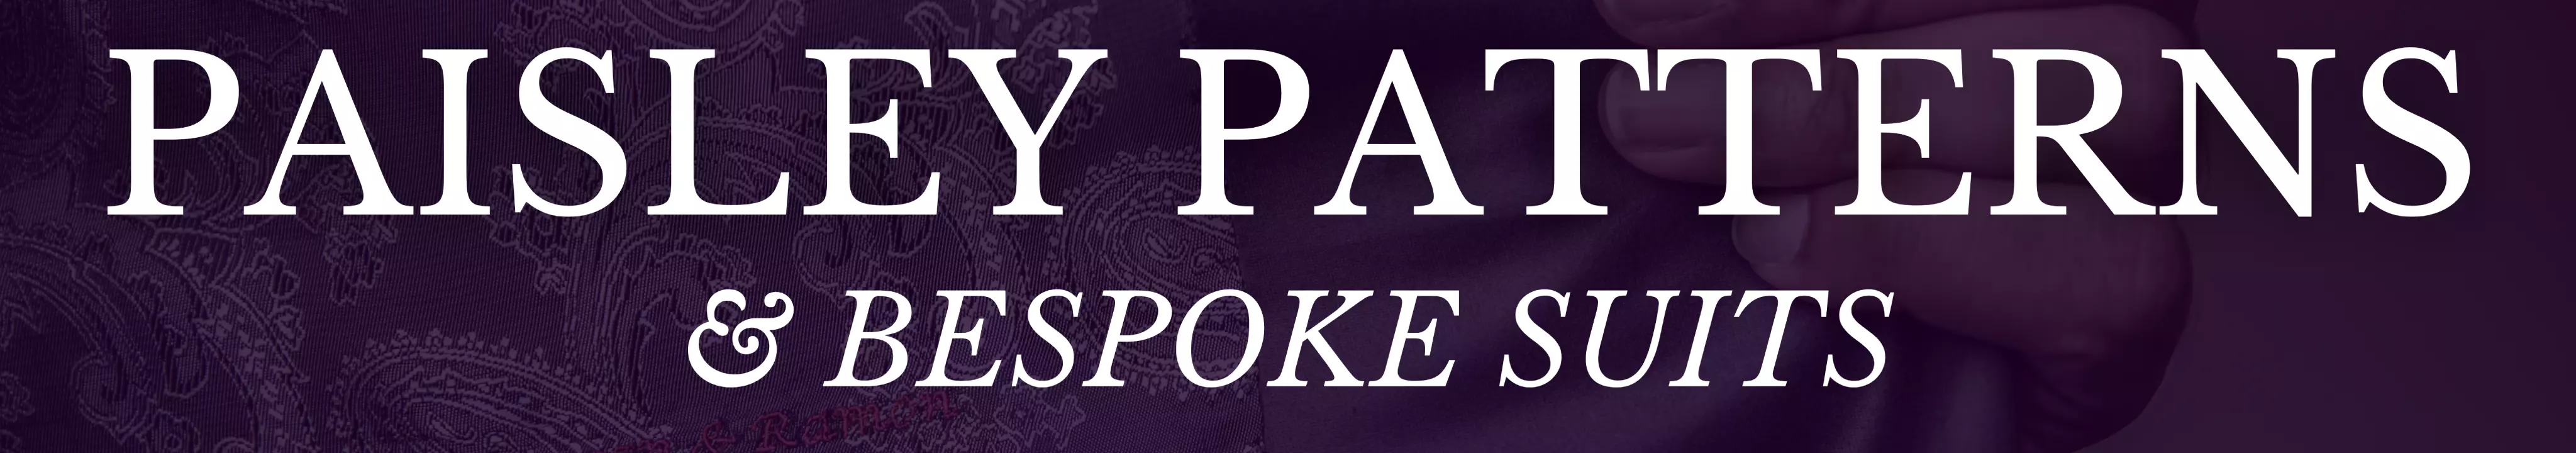 Relationship between paisley patterns and bespoke suits